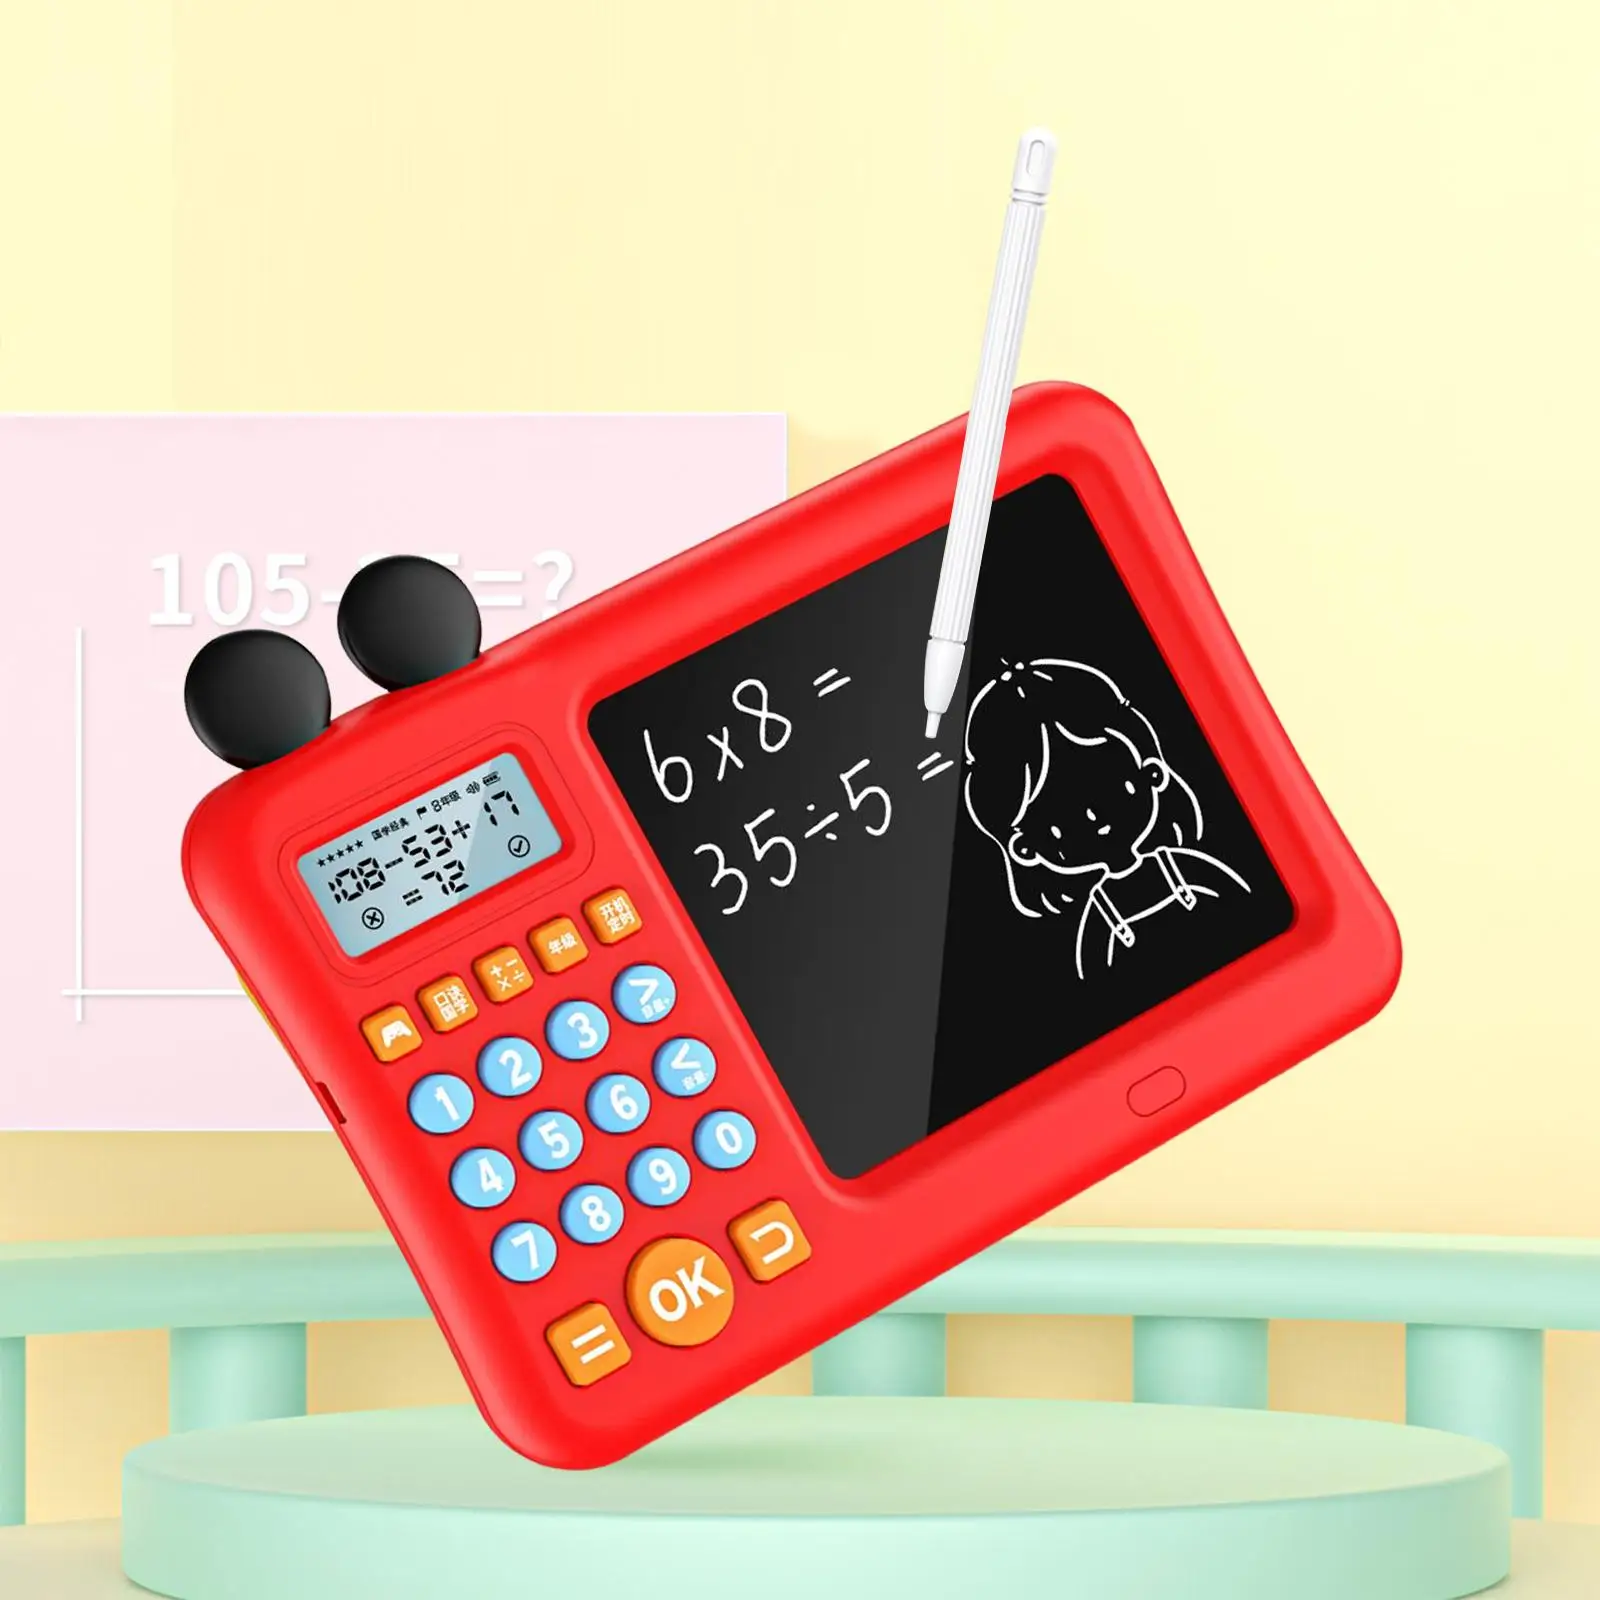 Maths Teaching Calculator Early Math Educational Toy Drawing Tablet Math Trainer Educational with Writing Board for Students